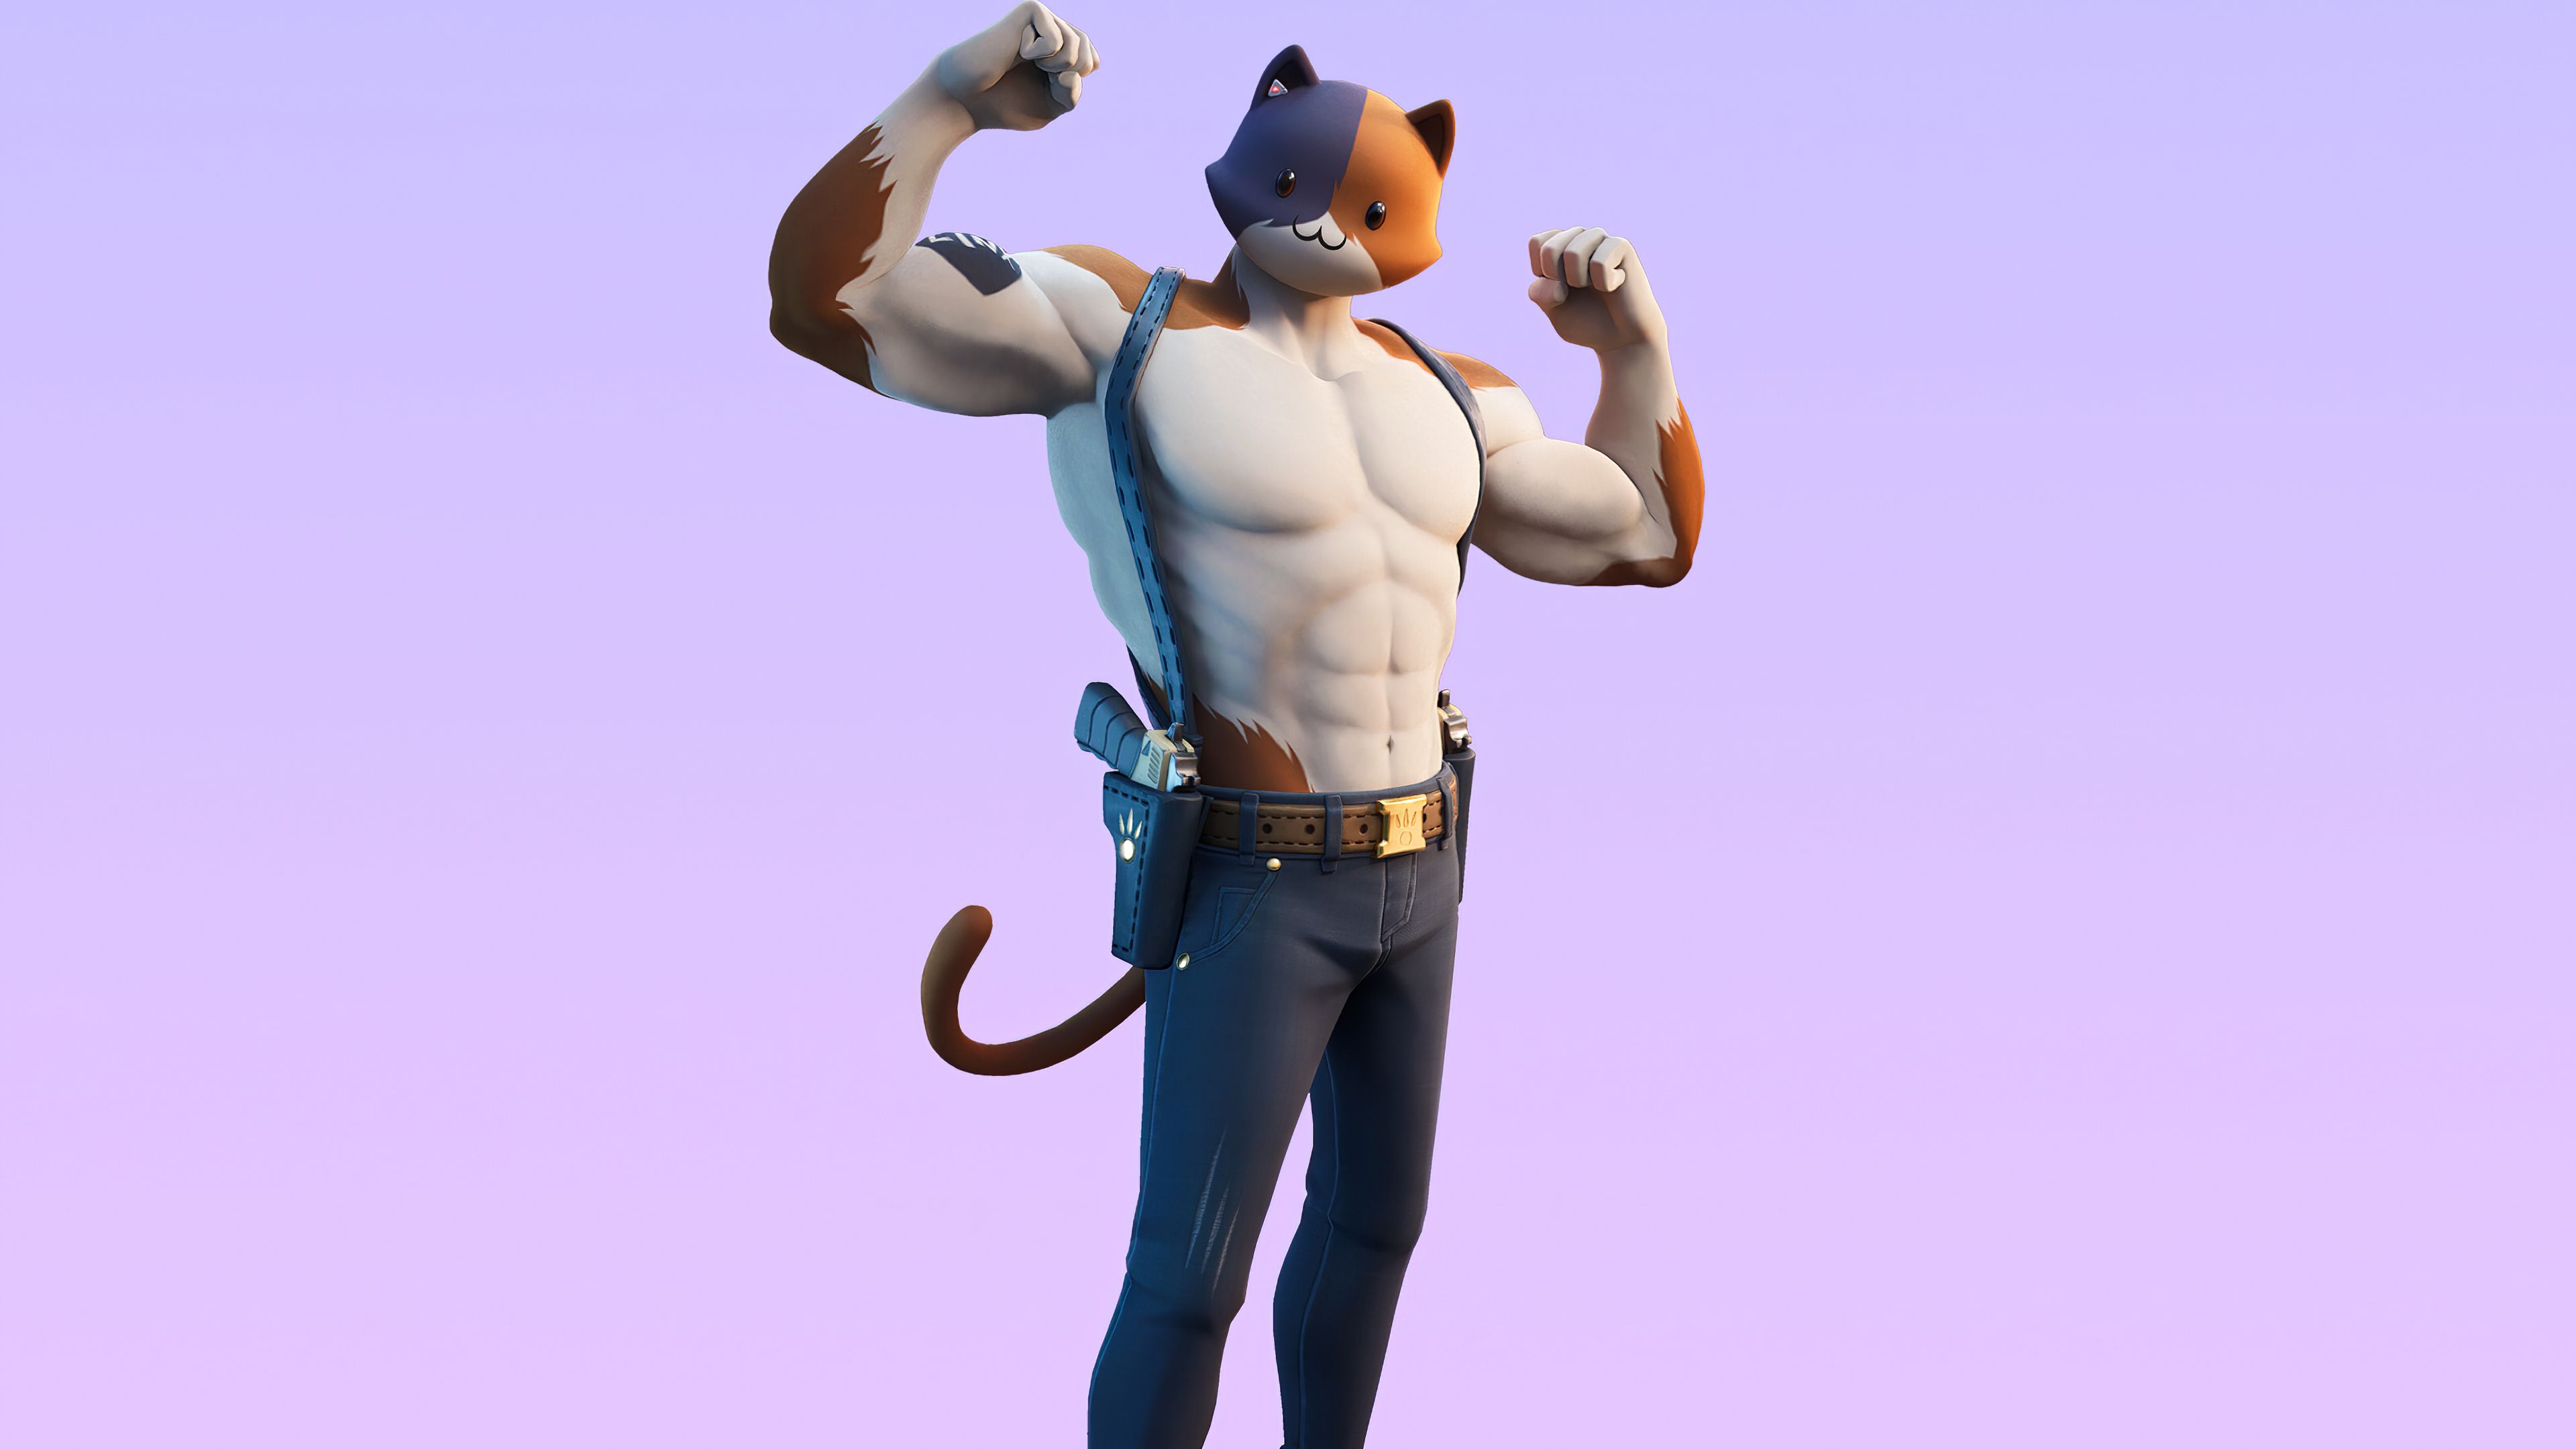 Fortnite Meowscles Skin Outfit 4K Wallpaper, HD Games 4K Wallpaper, Image, Photo and Background